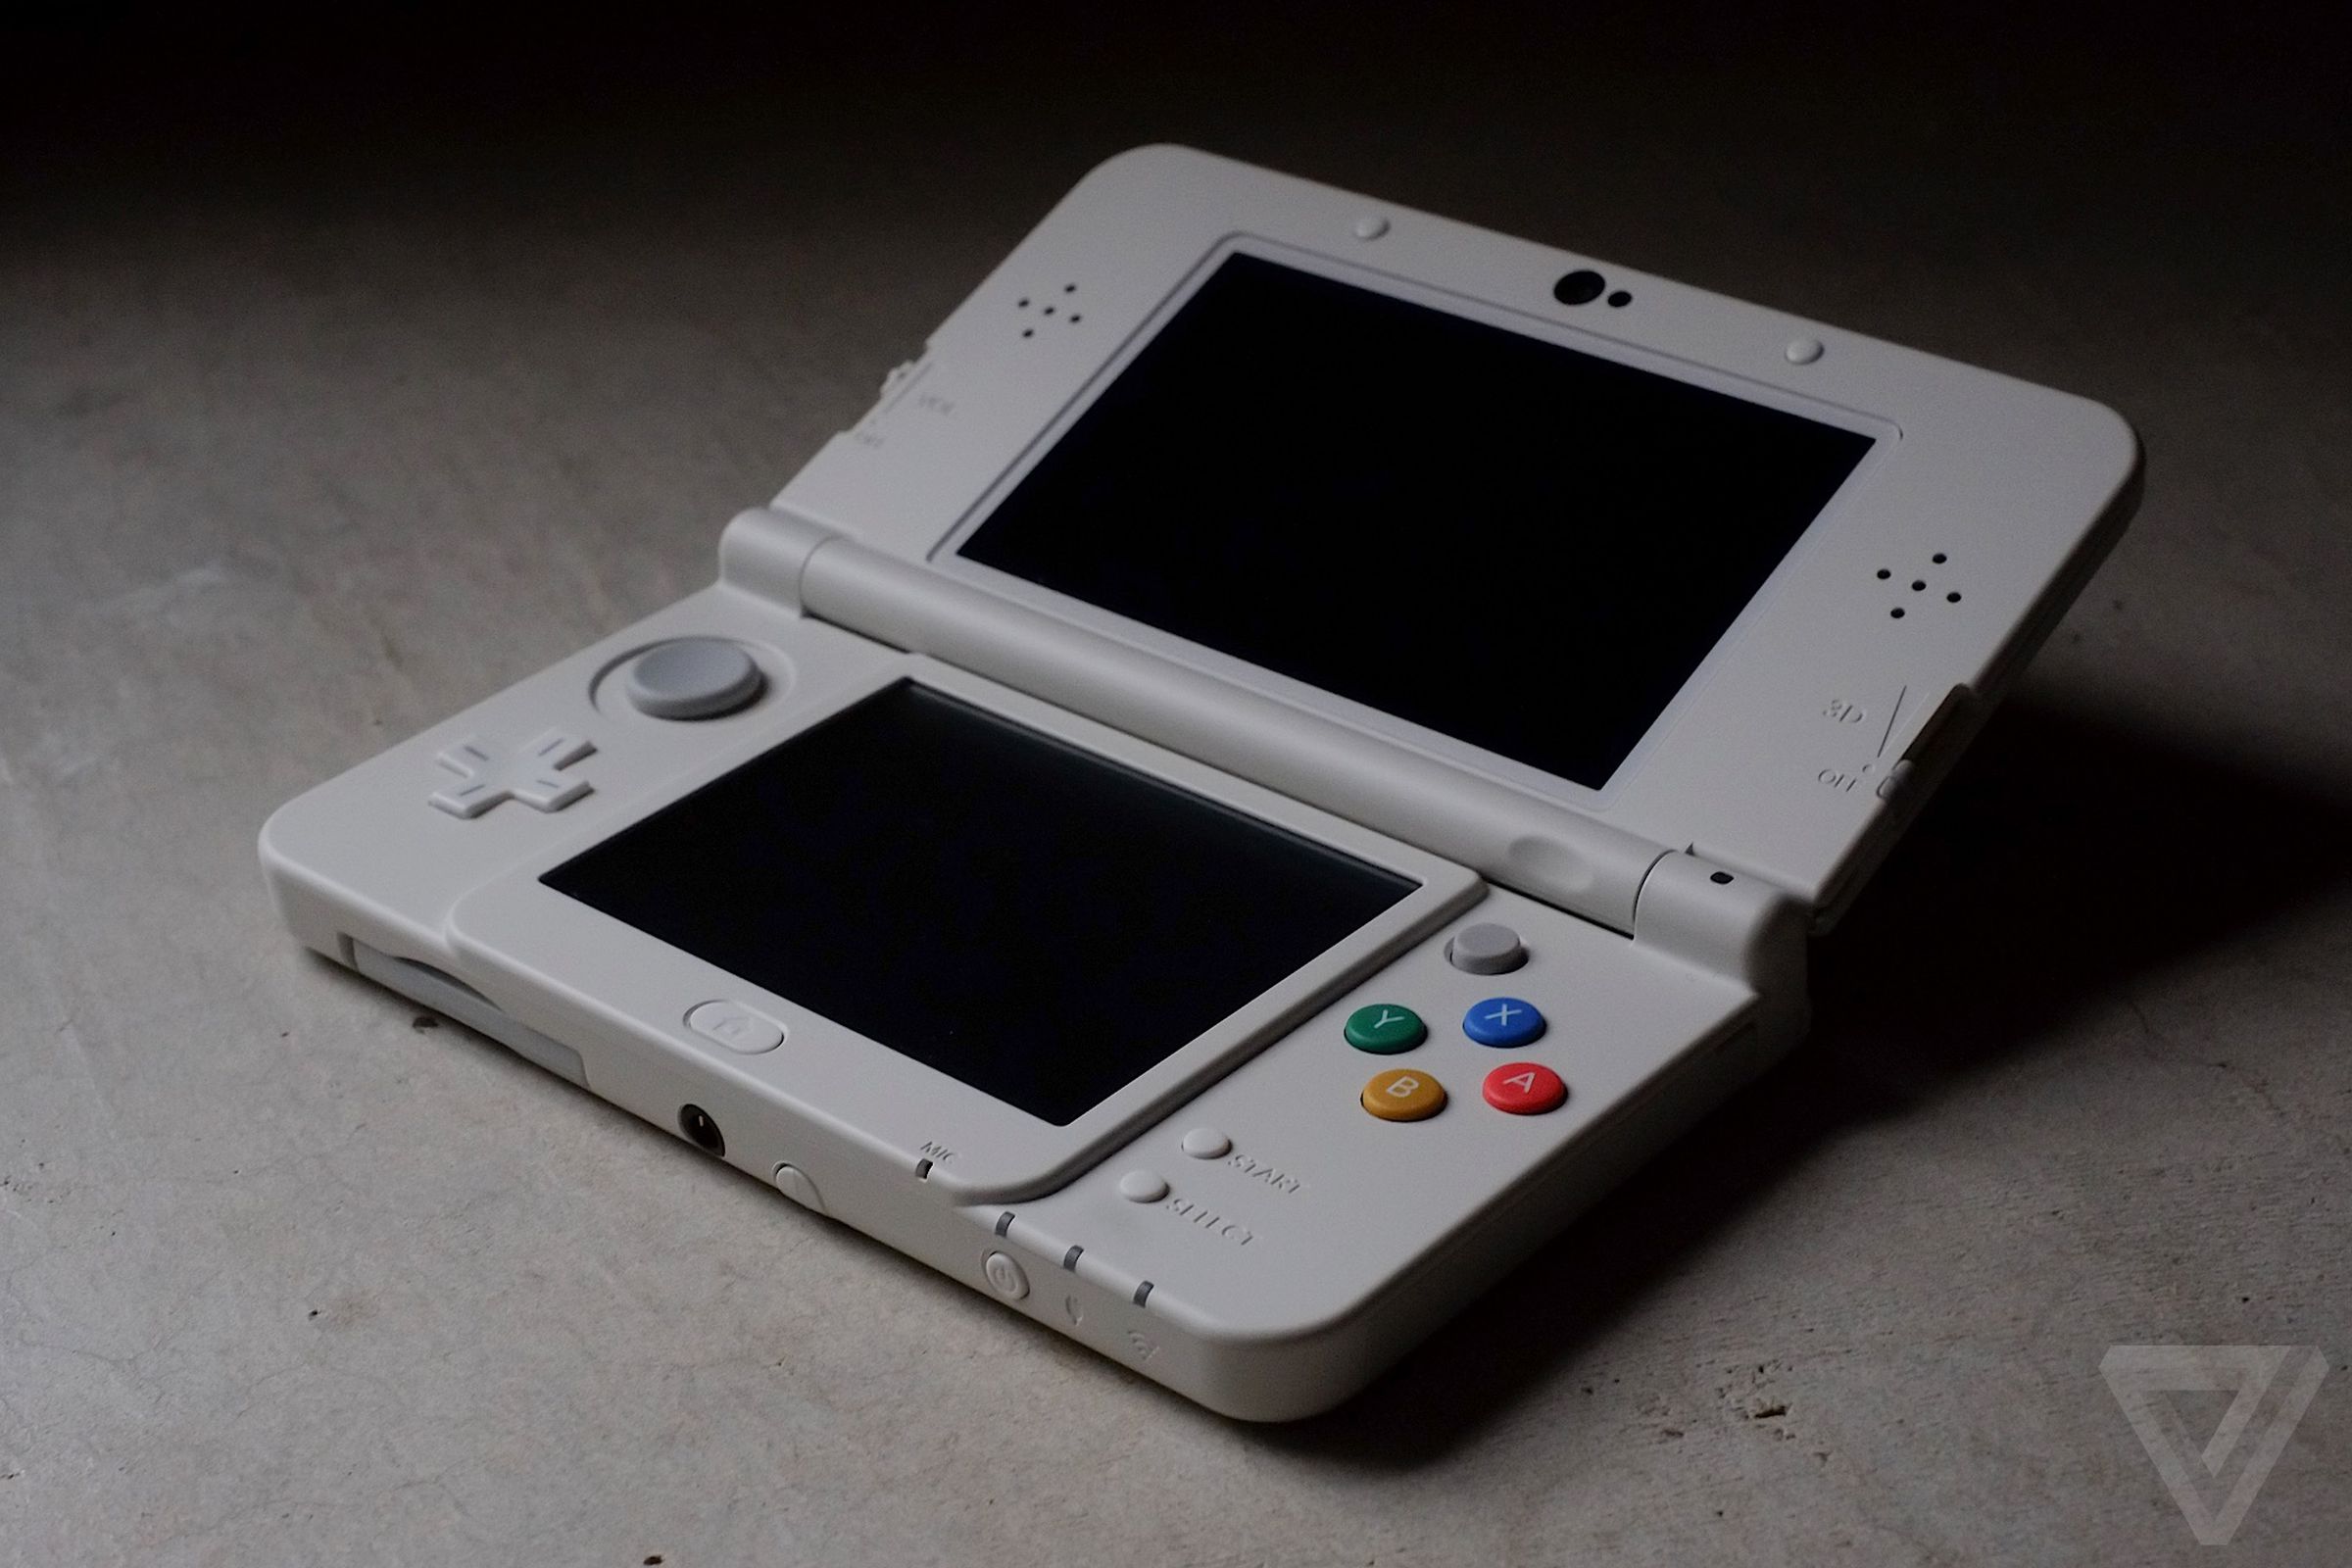 The New Nintendo 3DS.